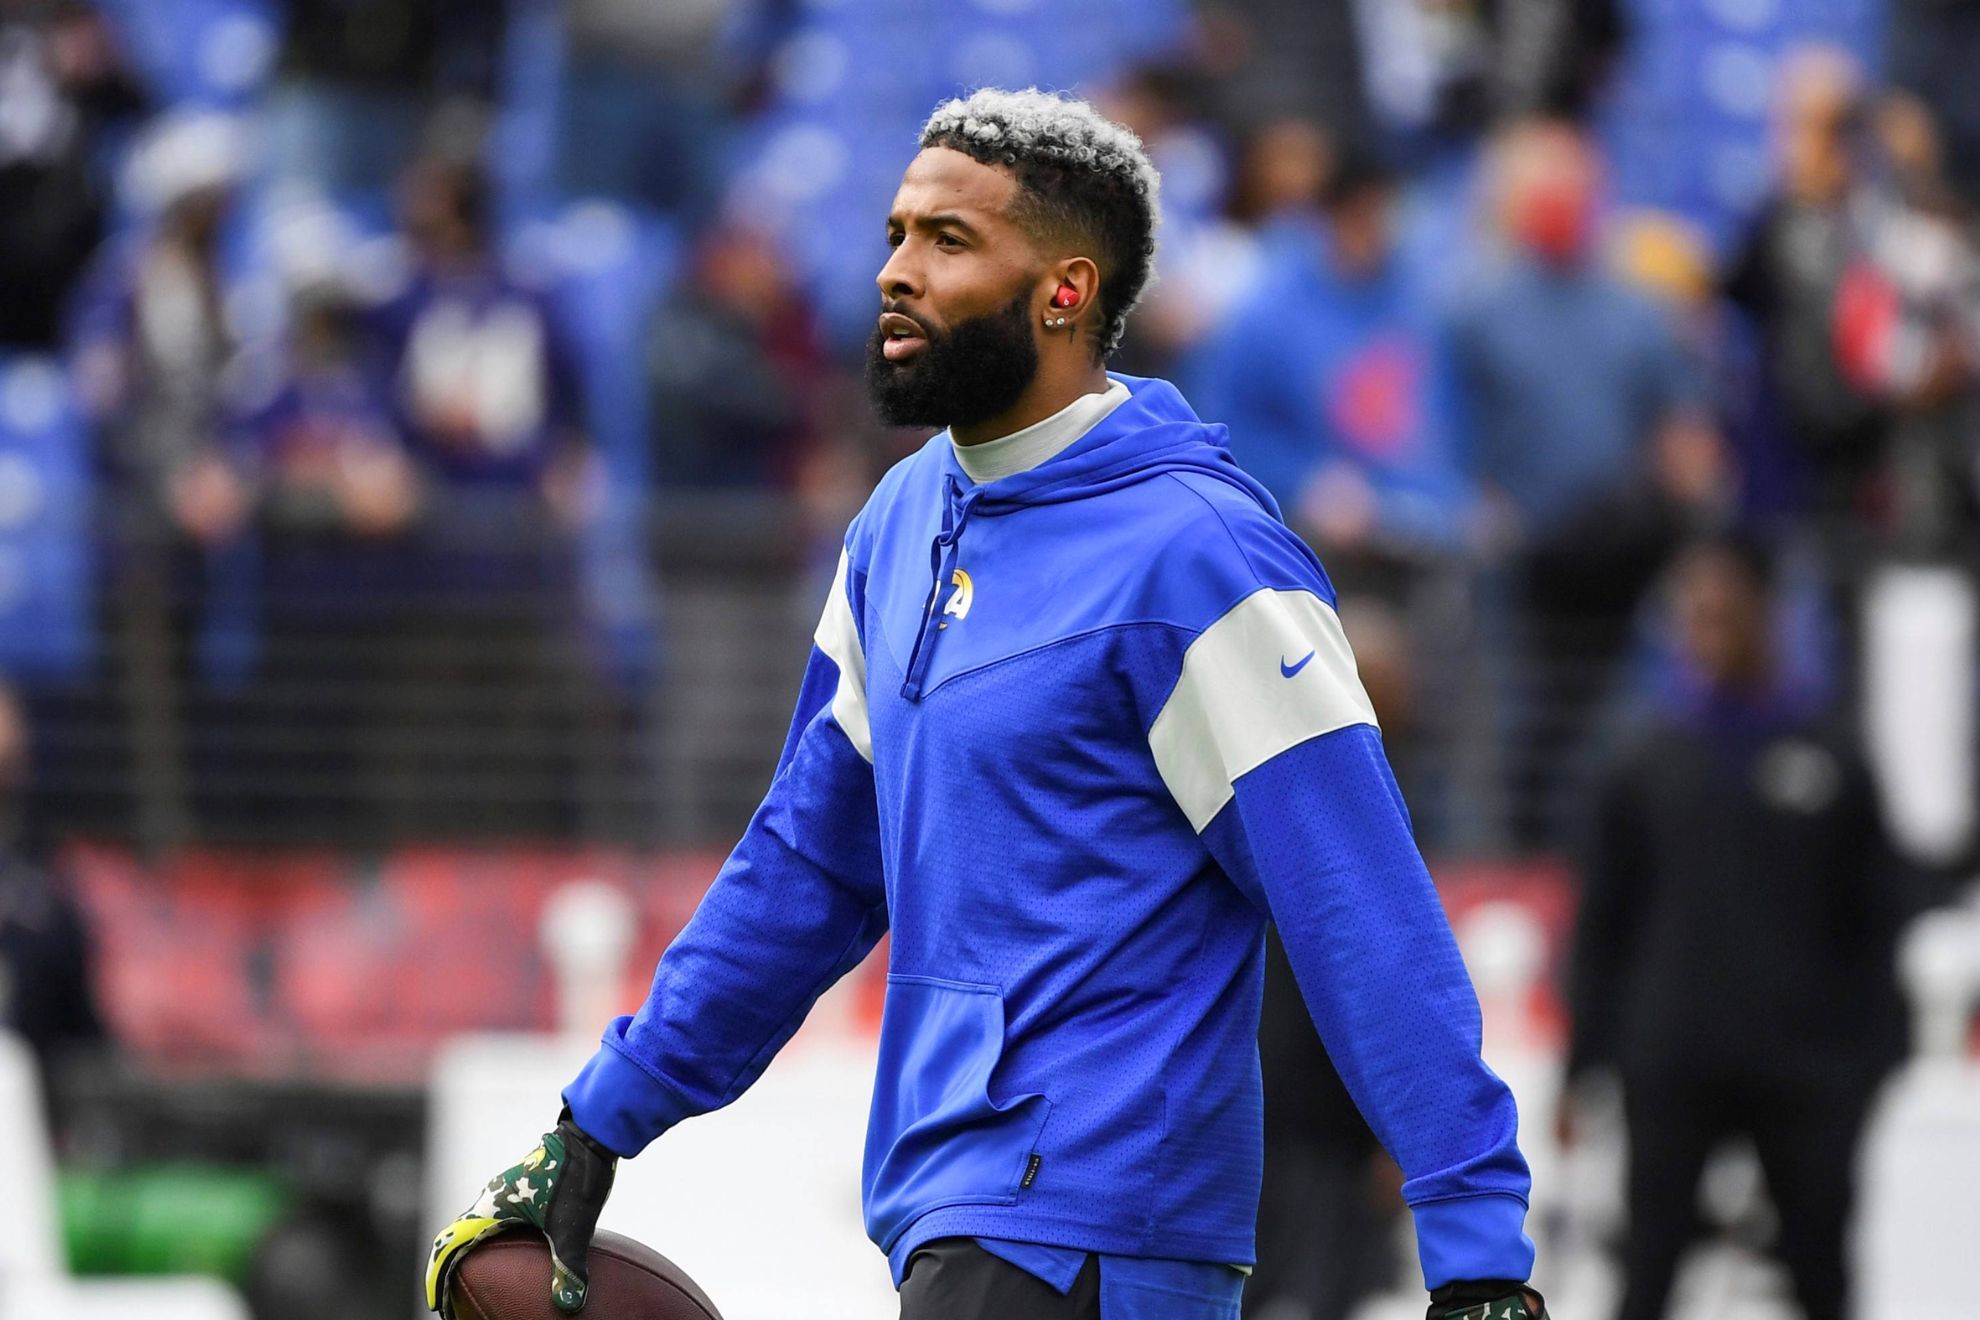 Odell Beckham Jr. played the majority of the 2021 season with the NFL Rams and won the Super Bowl. -AP